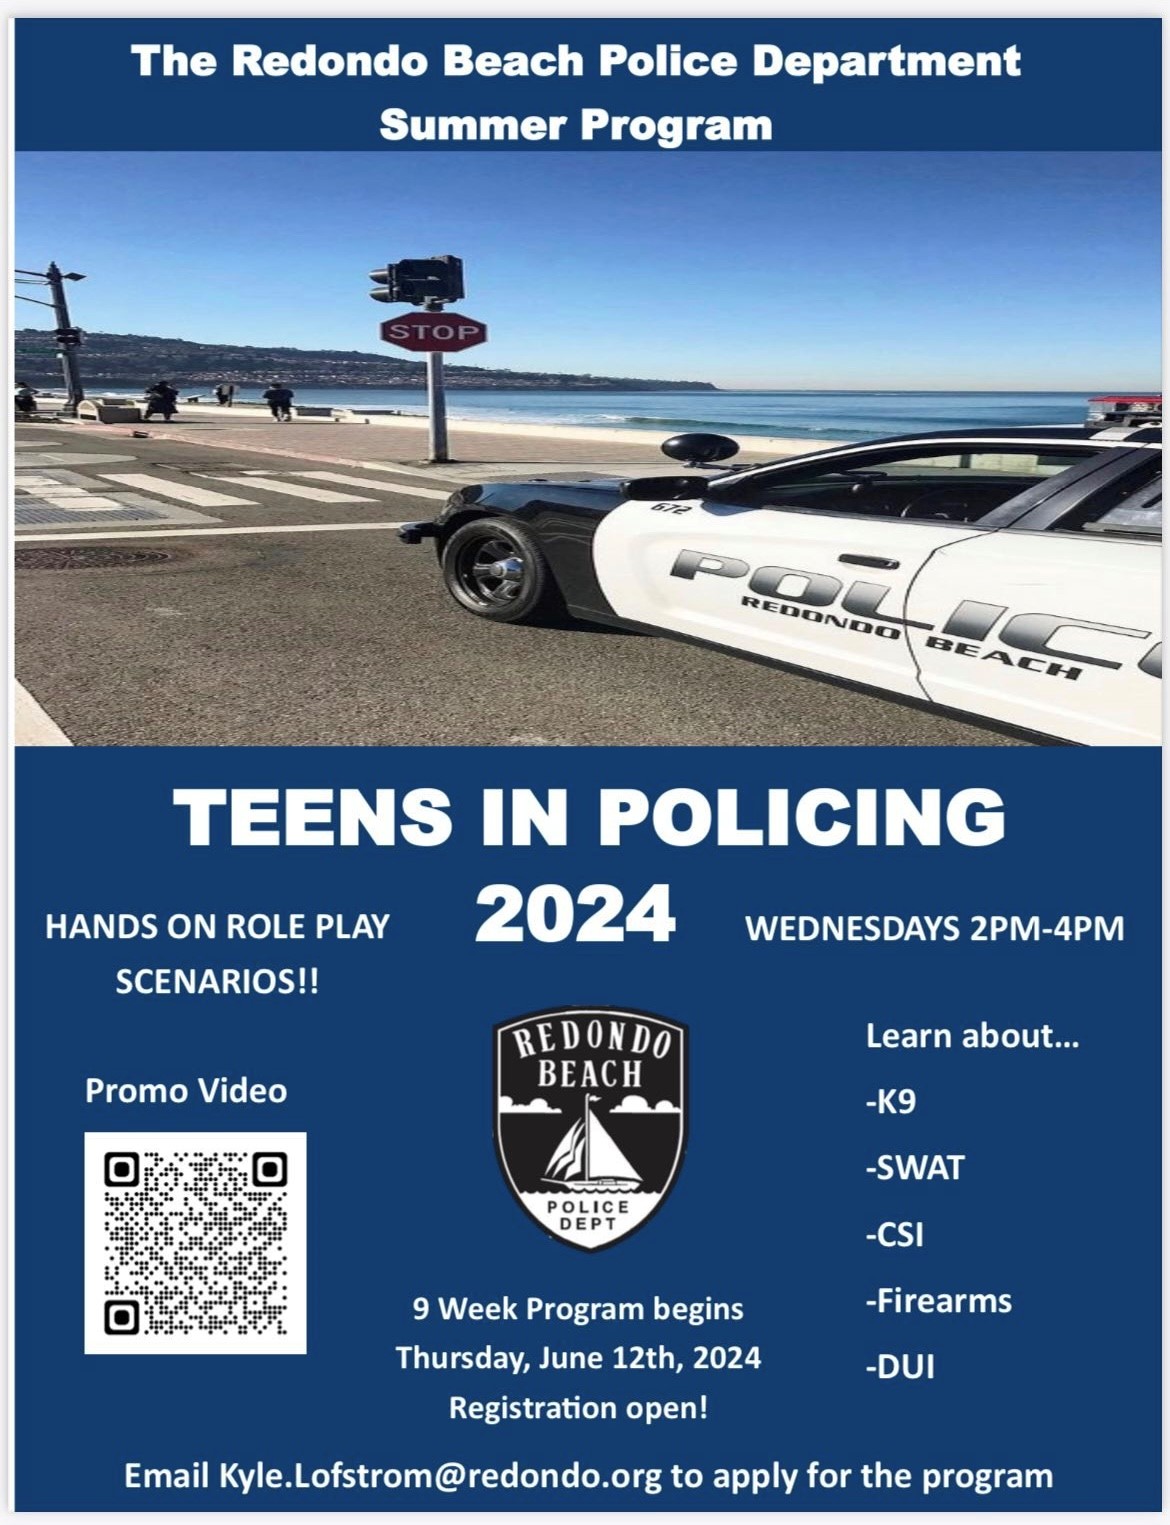 TEENS IN POLICING 2024